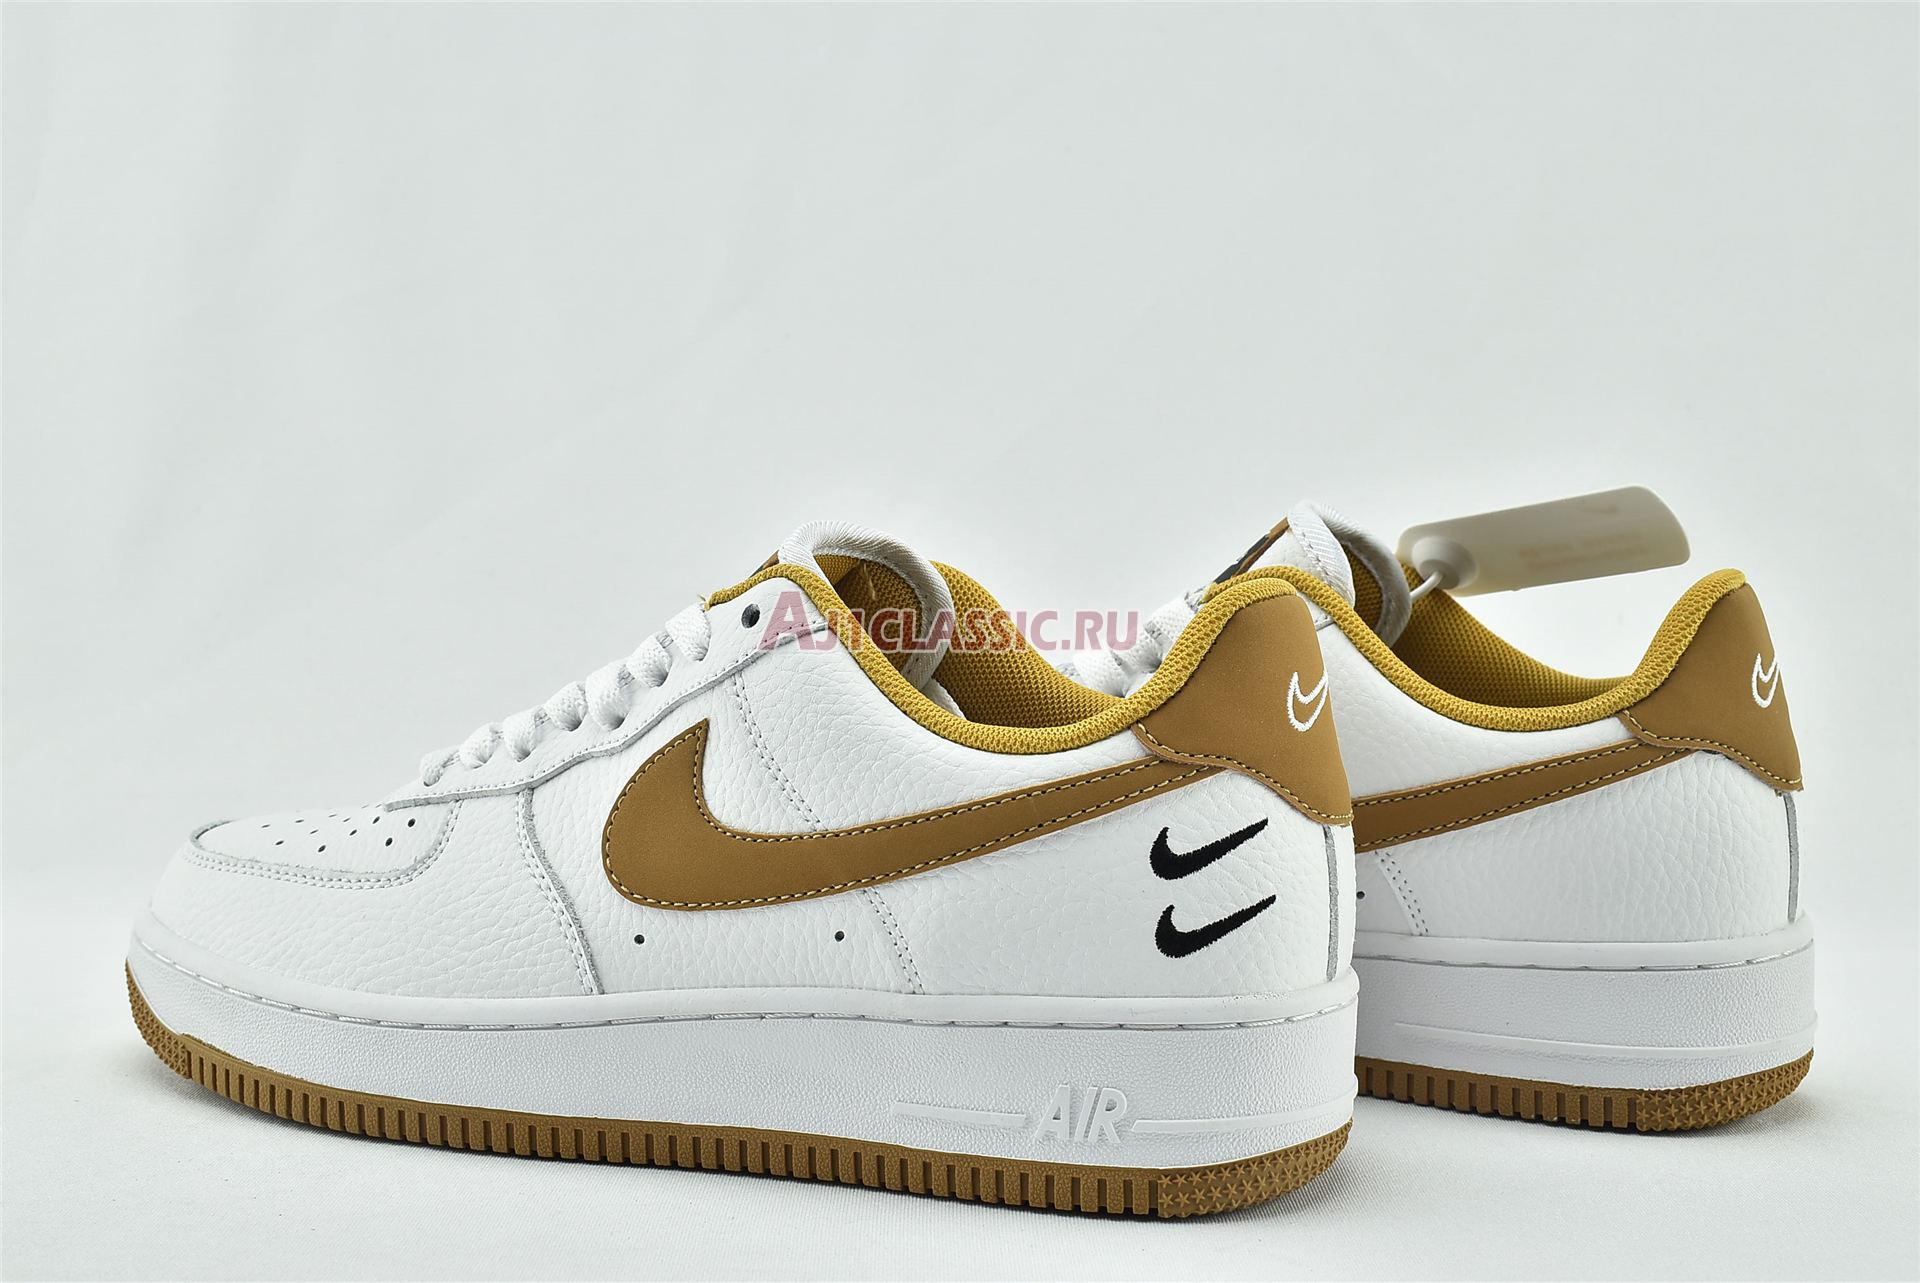 Nike Air Force 1 Low "With Dual Heel Swooshes" DH2947-100